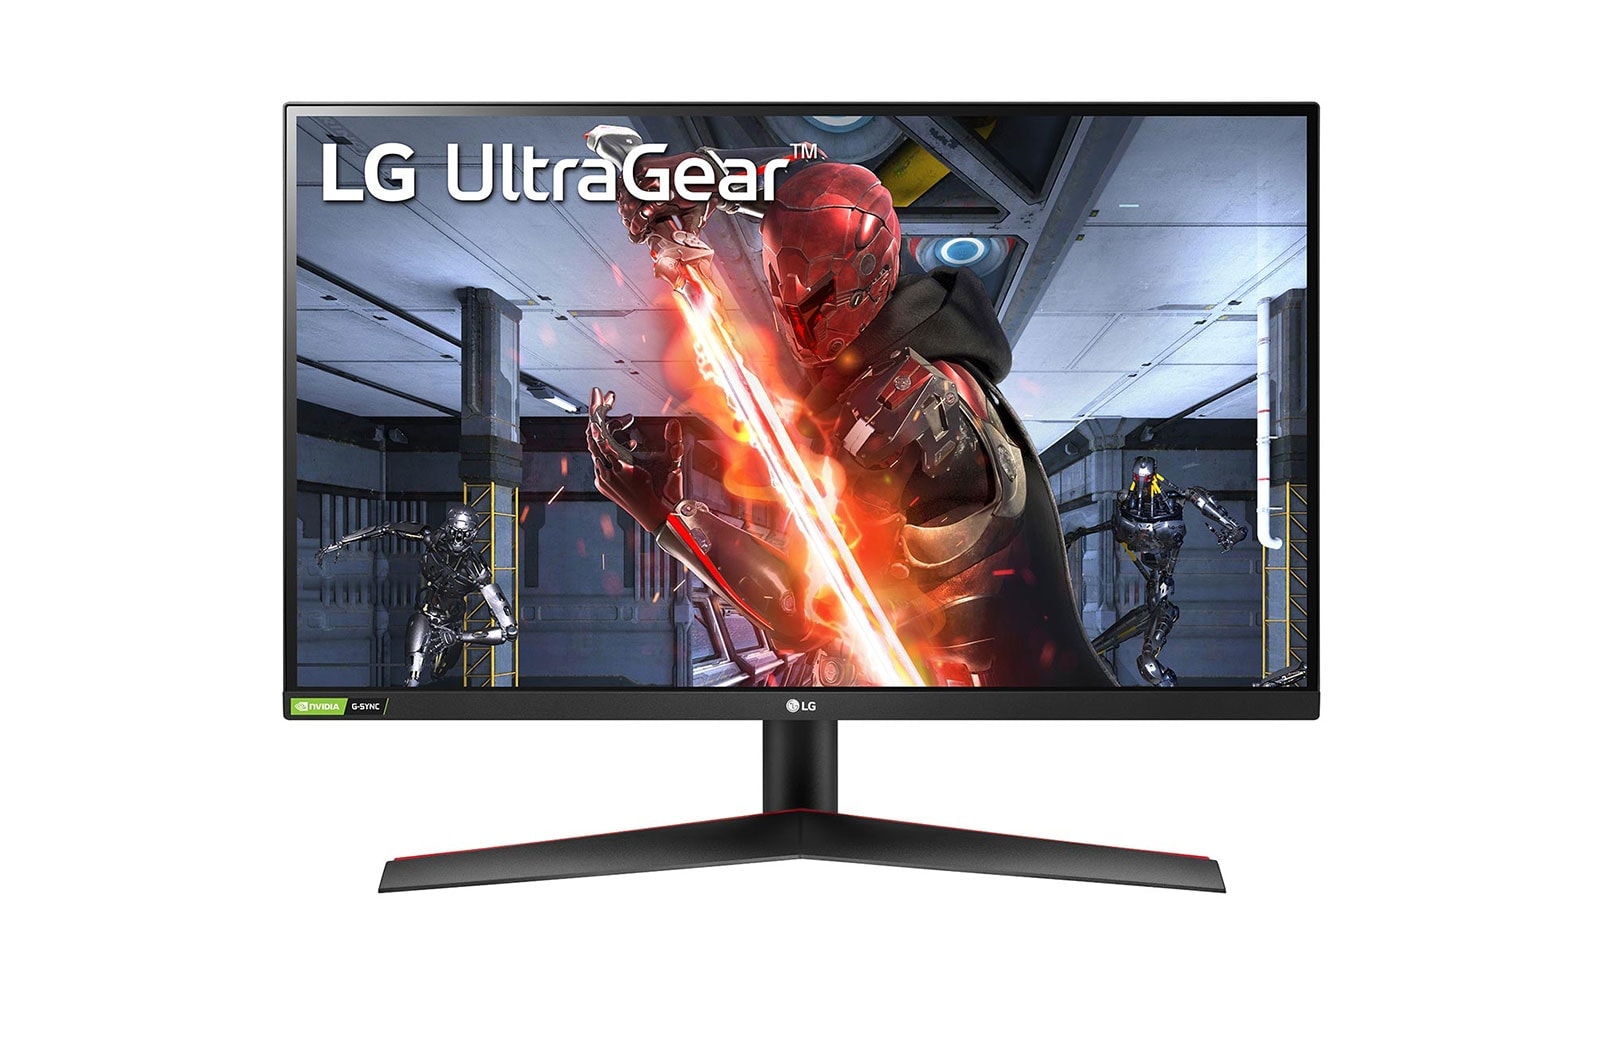 LG 27 (68.58cm) UltraGear QHD IPS 1ms 144Hz HDR Monitor with G-SYNC Compatibility, 27GN800-B